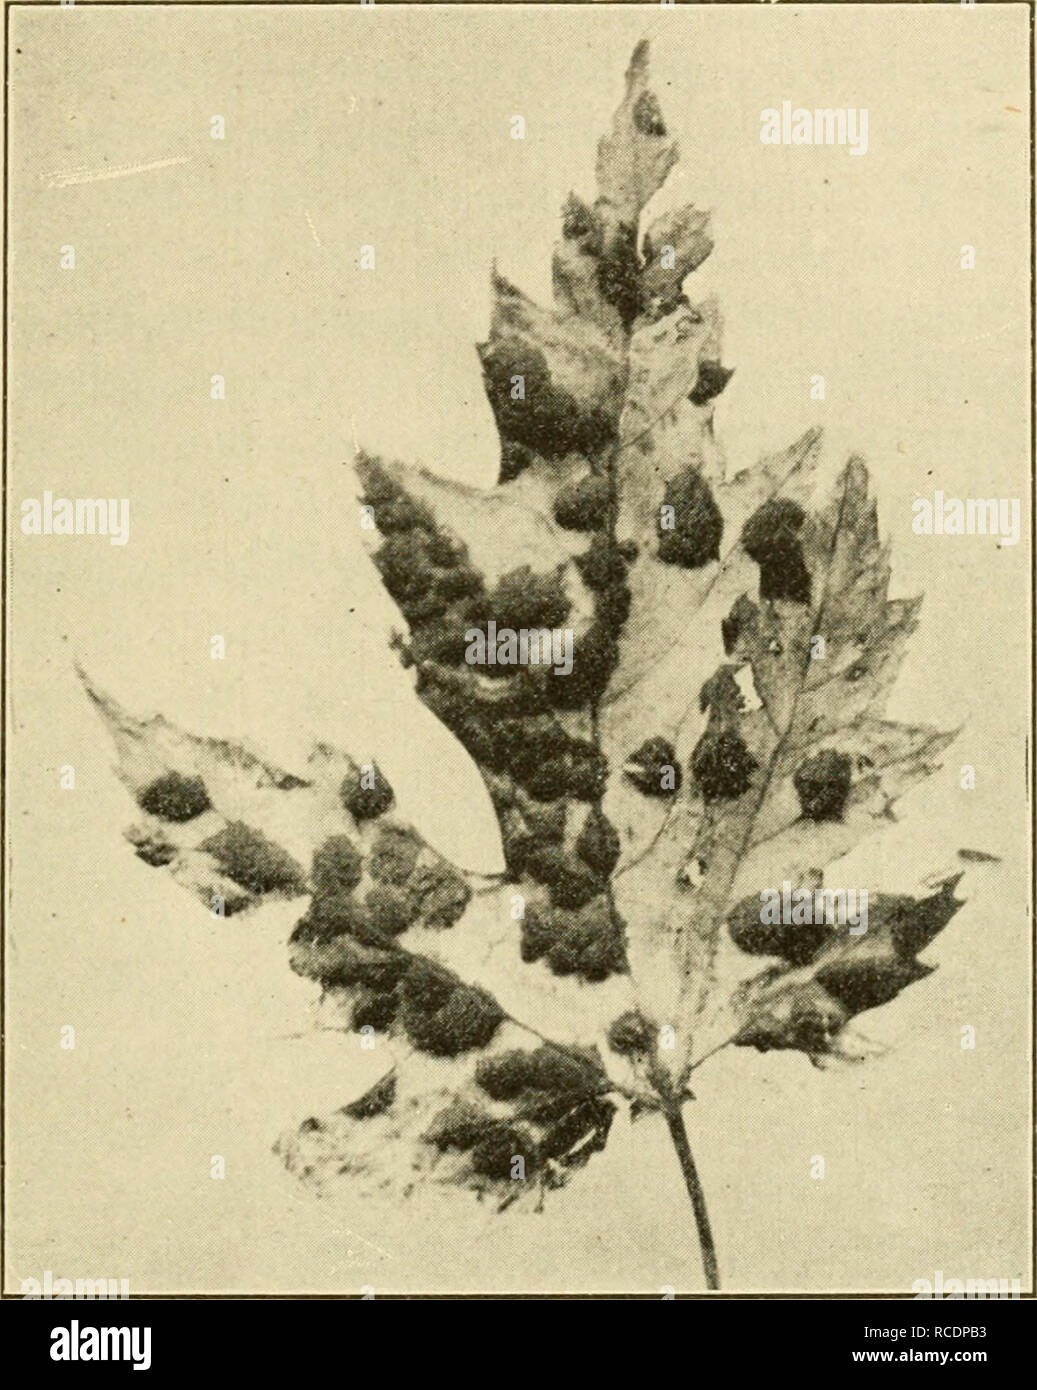 . Diseases of economic plants. Plant diseases. Trees and Timber 393 and die as though frosted. Young leaves and shoots are killed and by their death induce abnormal branching, result- ing in a compact head. The disease seems limited to young trees. Bordeaux mixture is advised — three or more sprayings.. Fig. 208. — Maple tar-spot. After Heald. Thrombosis {Verticillium). — Leaves wilt and branches die due to plugging of the veins by the fungus. Dark streaks show in the wood of affected twigs. MULBERRY Blight {Bacterium mori B. &amp; L.). —Upon the leaf small, reddish-brown spots, pellucid when  Stock Photo